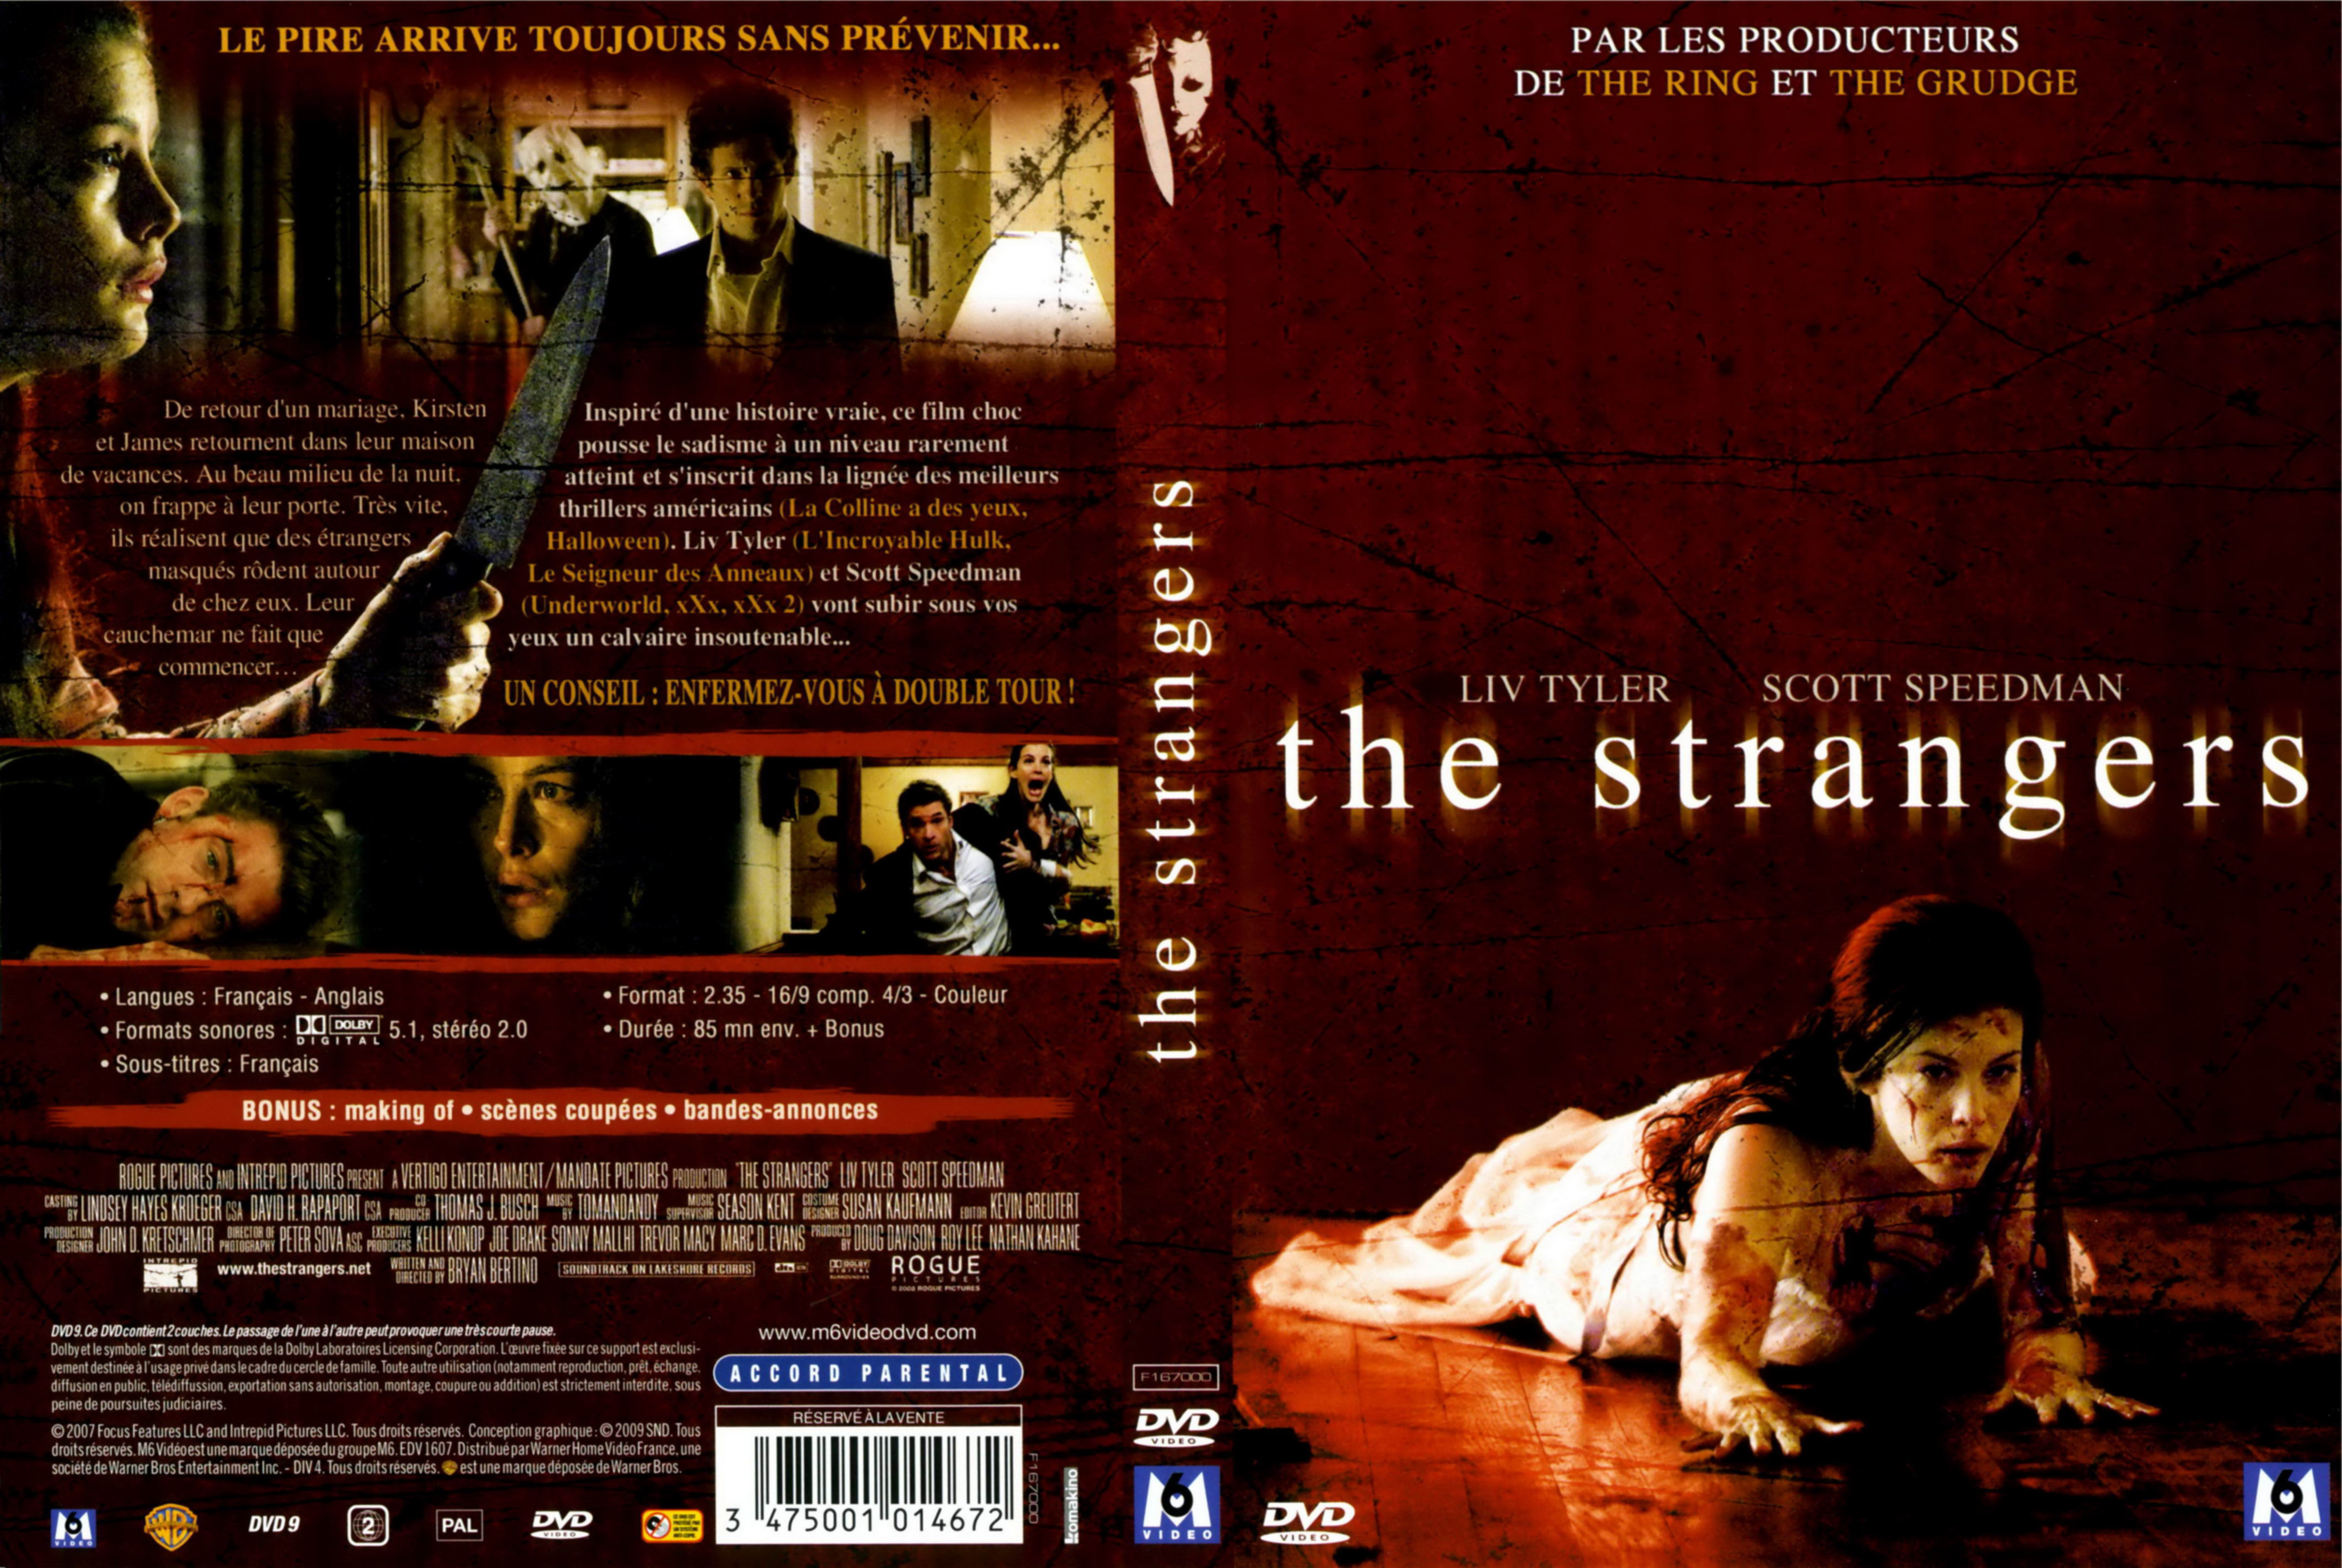 Jaquette DVD The strangers